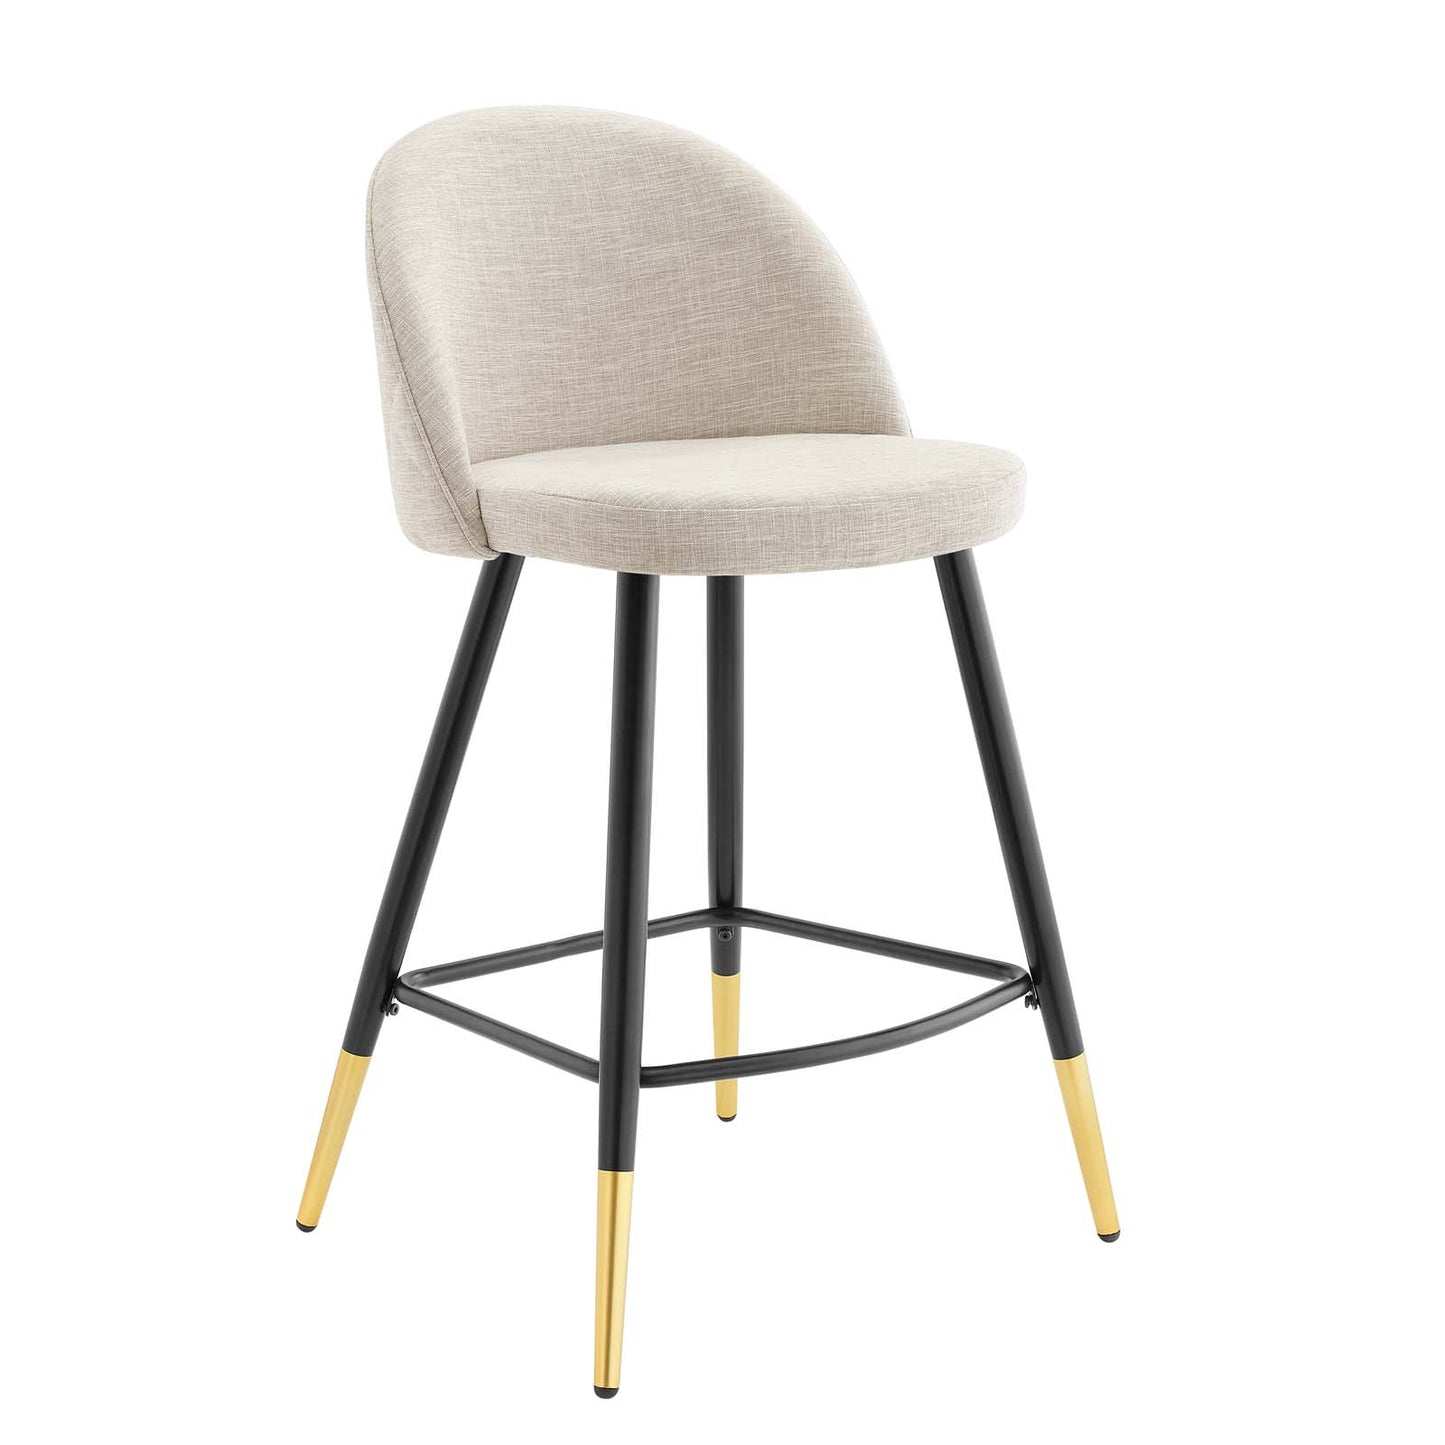 Cordial Fabric Counter Stools - Set of 2 Beige EEI-4528-BEI